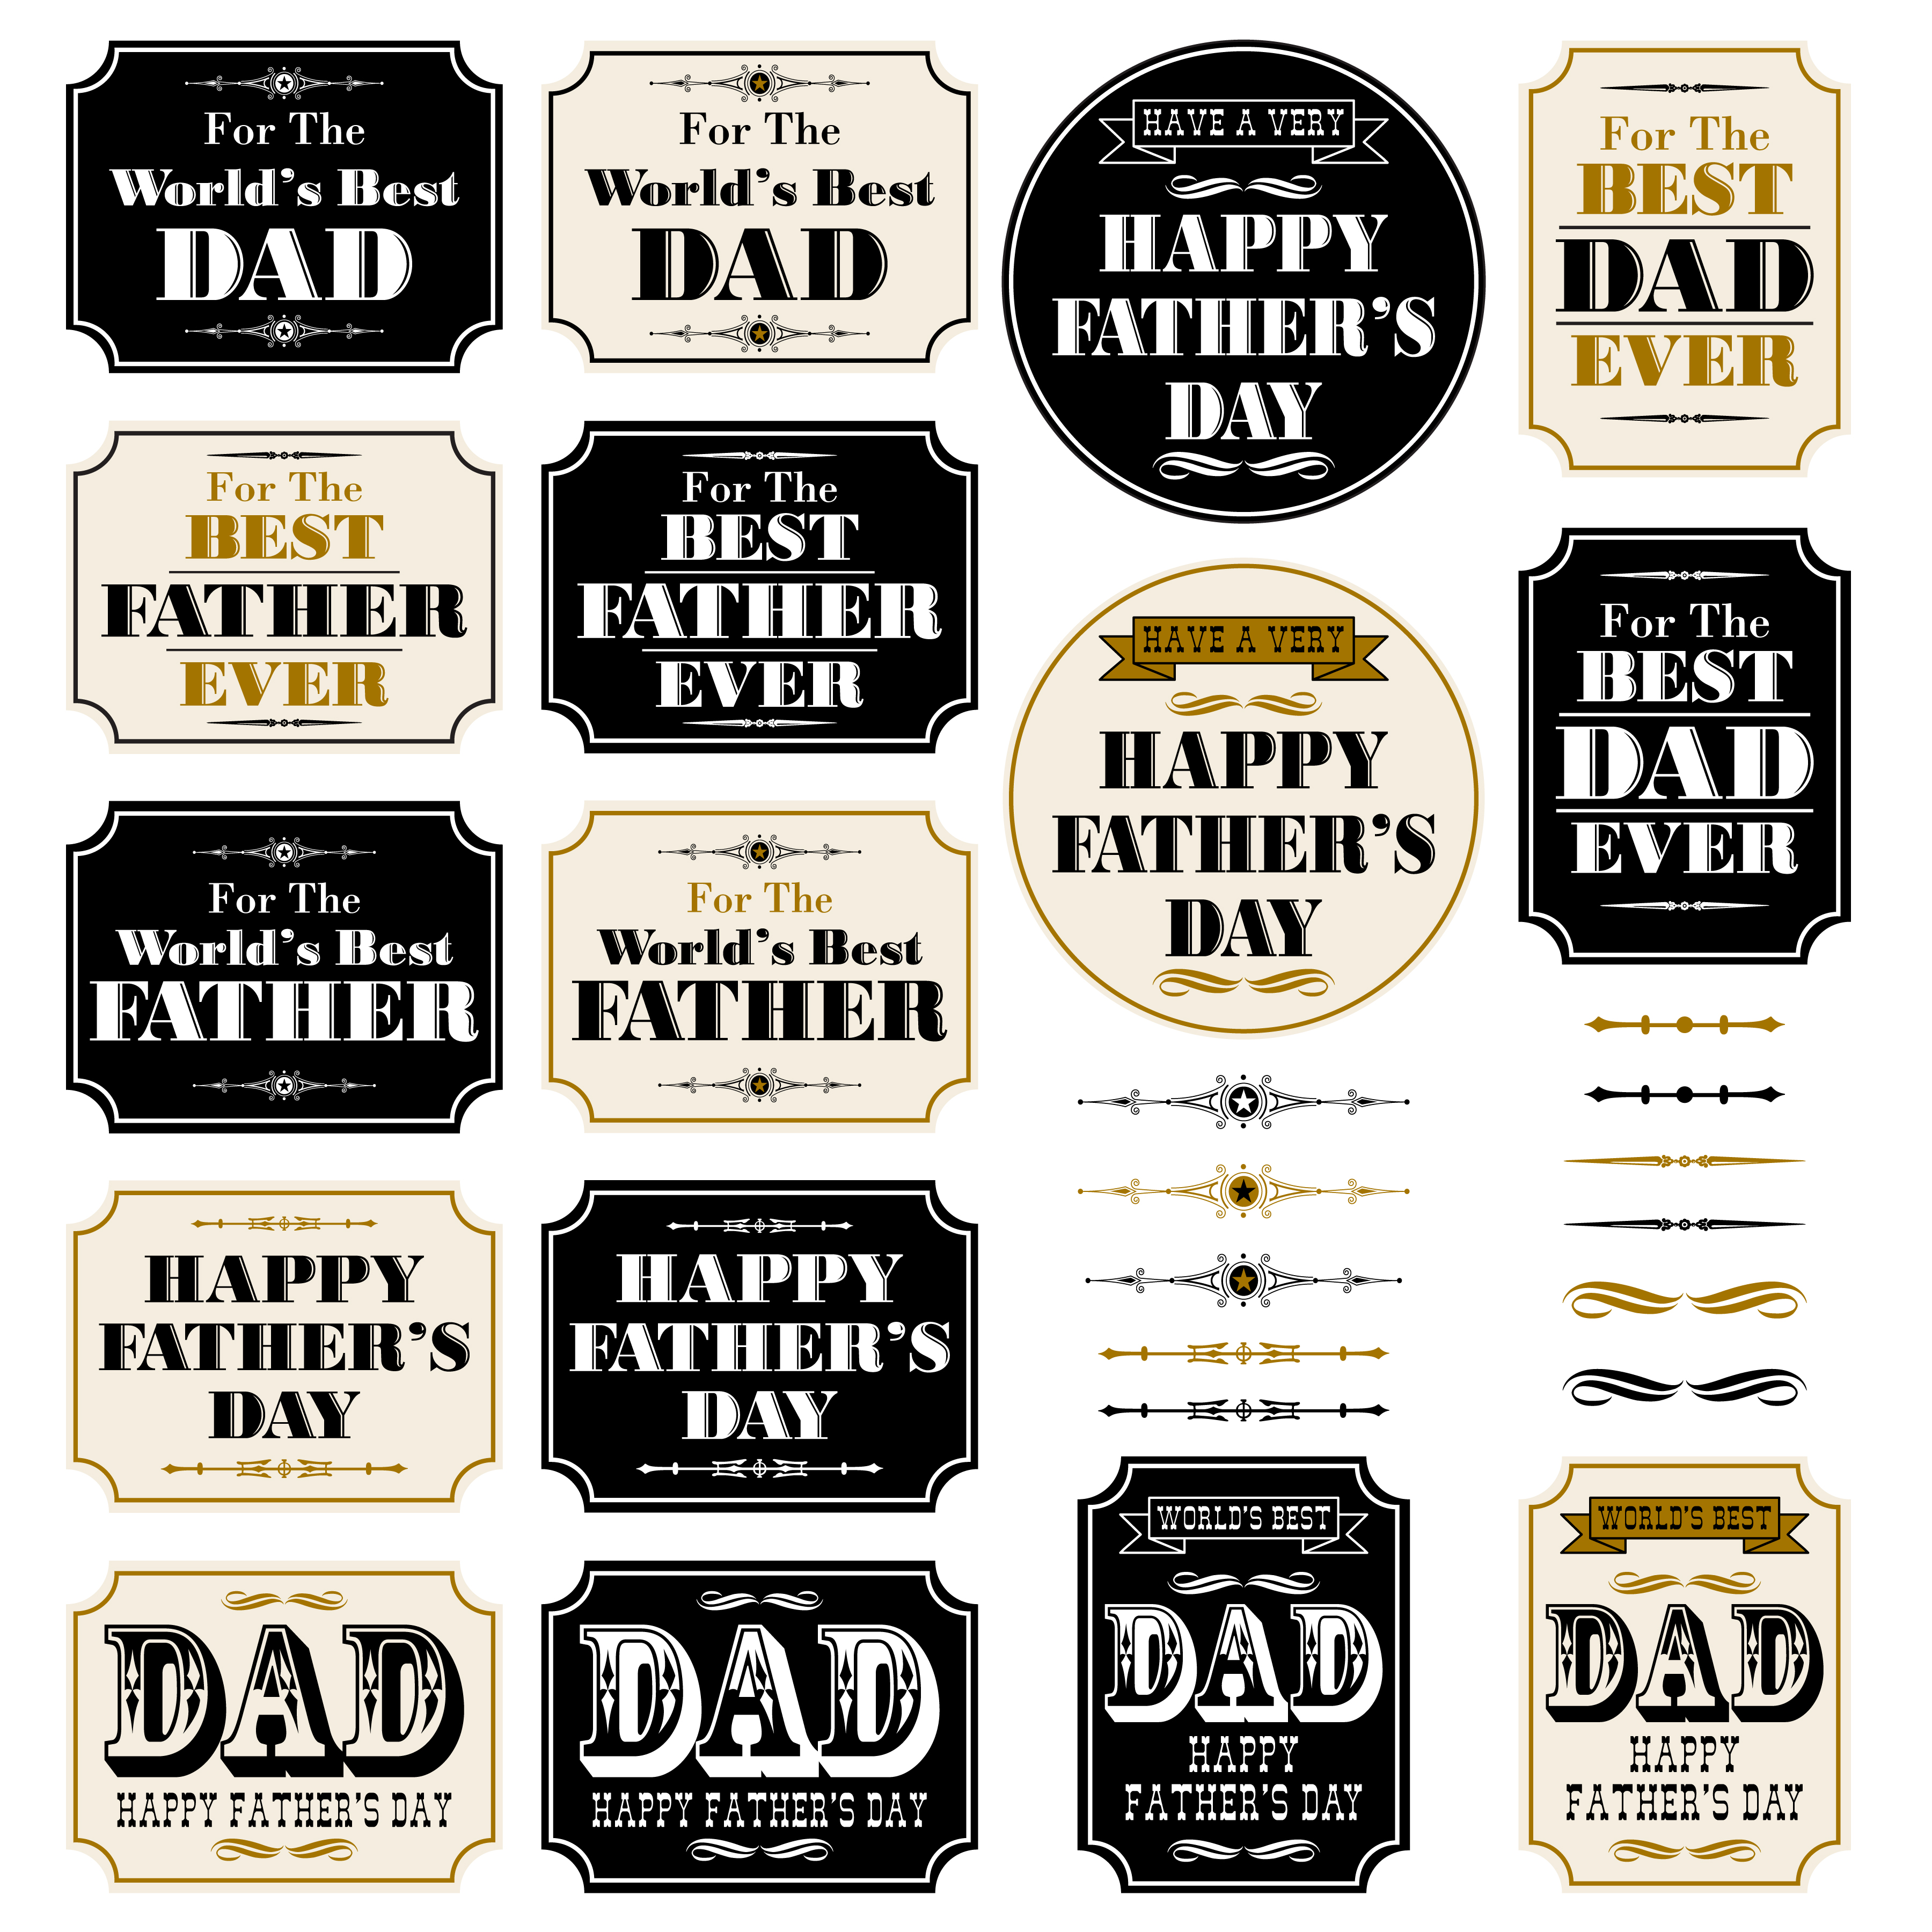 S day fashioned placard. Father clipart old dad